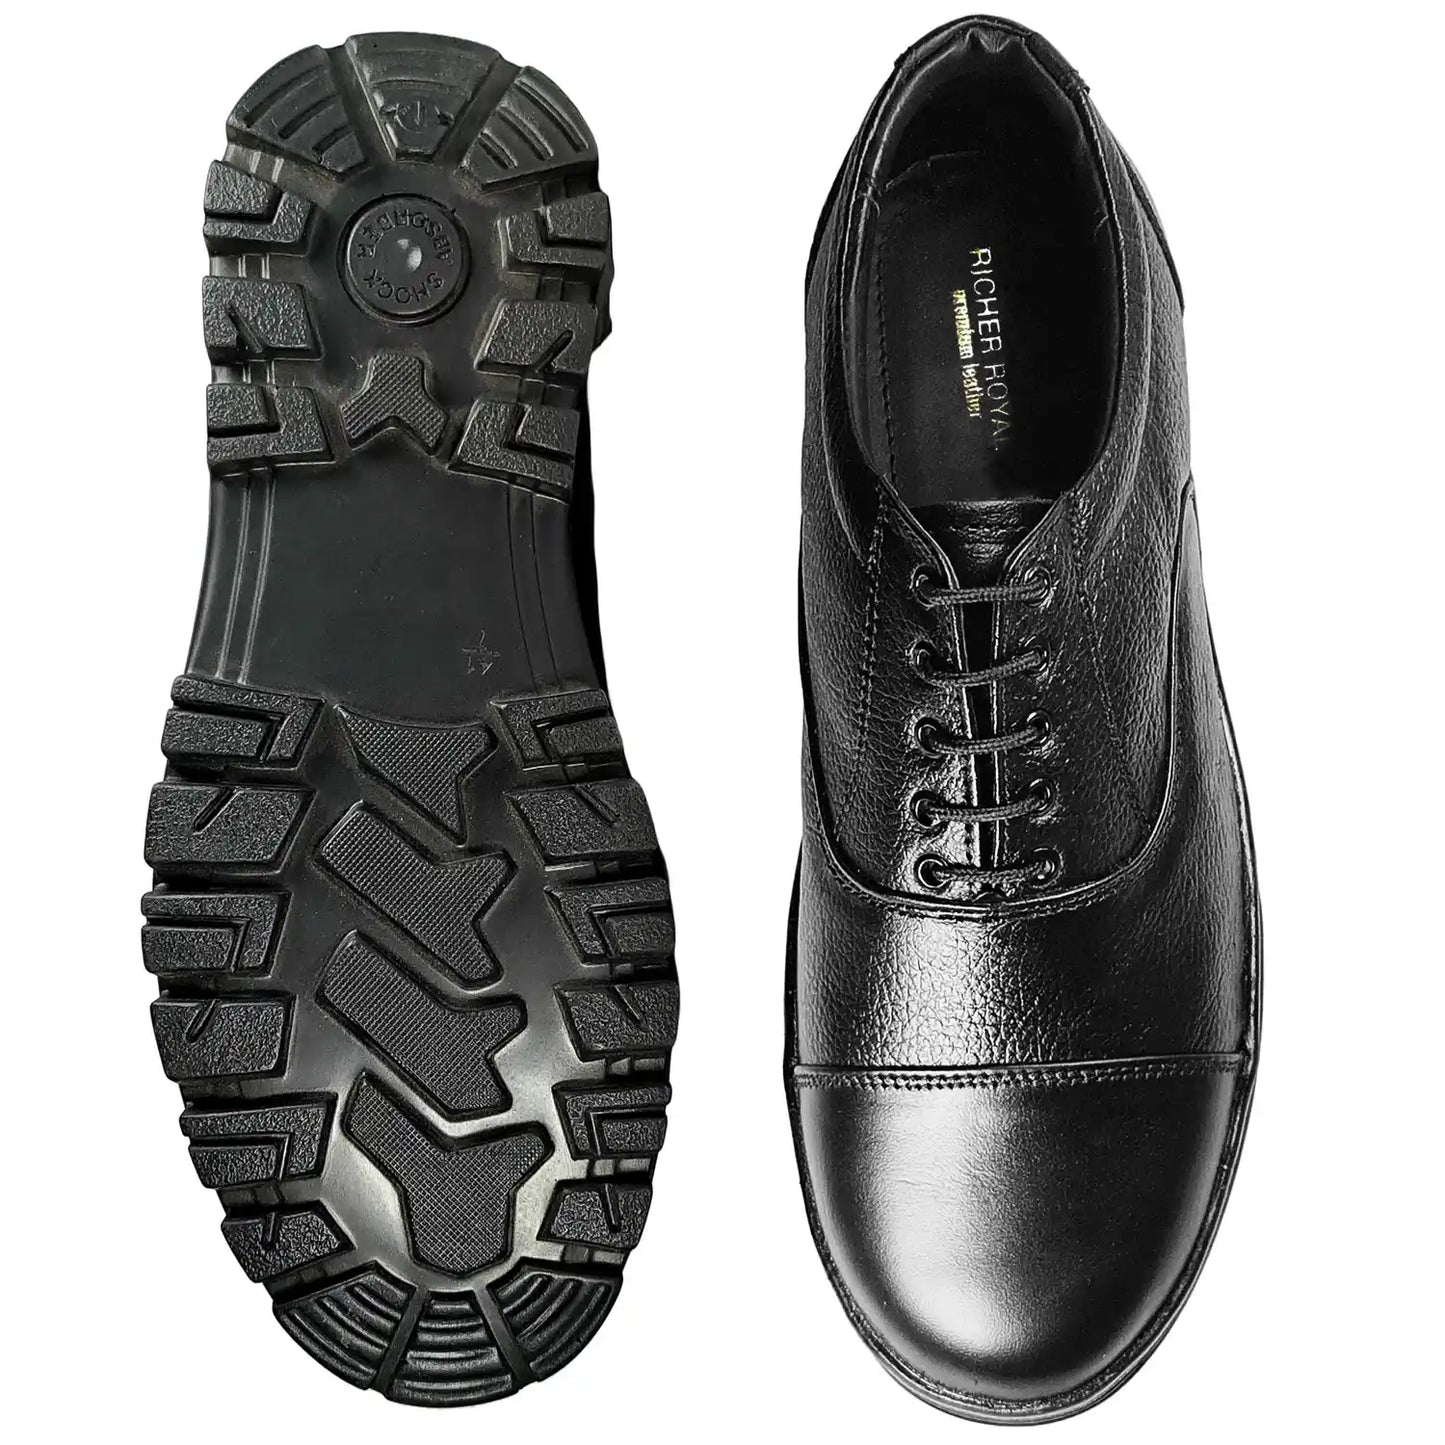 Police Uniform Shoes Pure Leather Oxford Lace Up